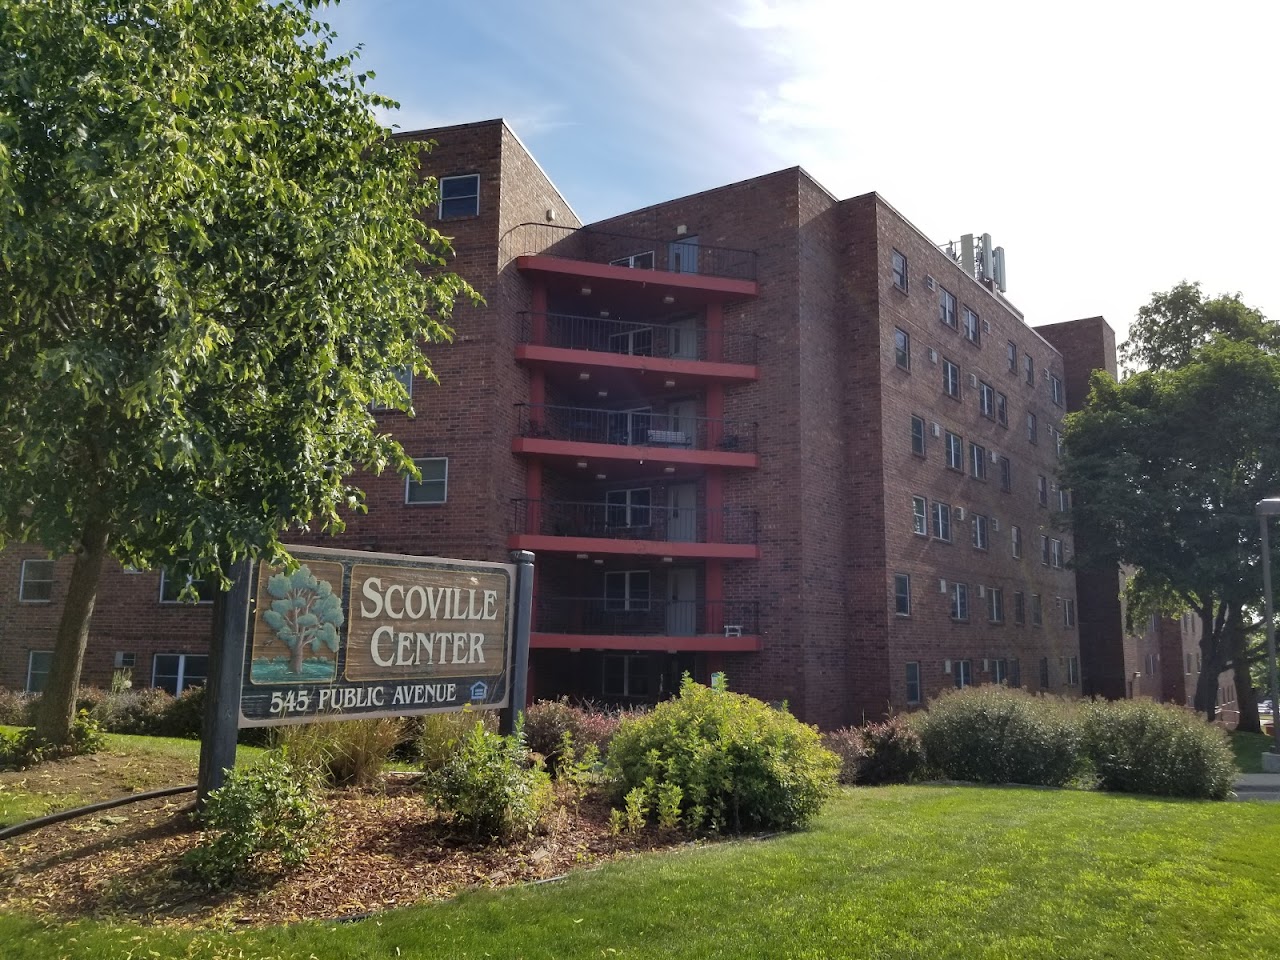 Photo of SCOVILLE CENTER. Affordable housing located at 545 PUBLIC AVENUE BELOIT, WI 53511